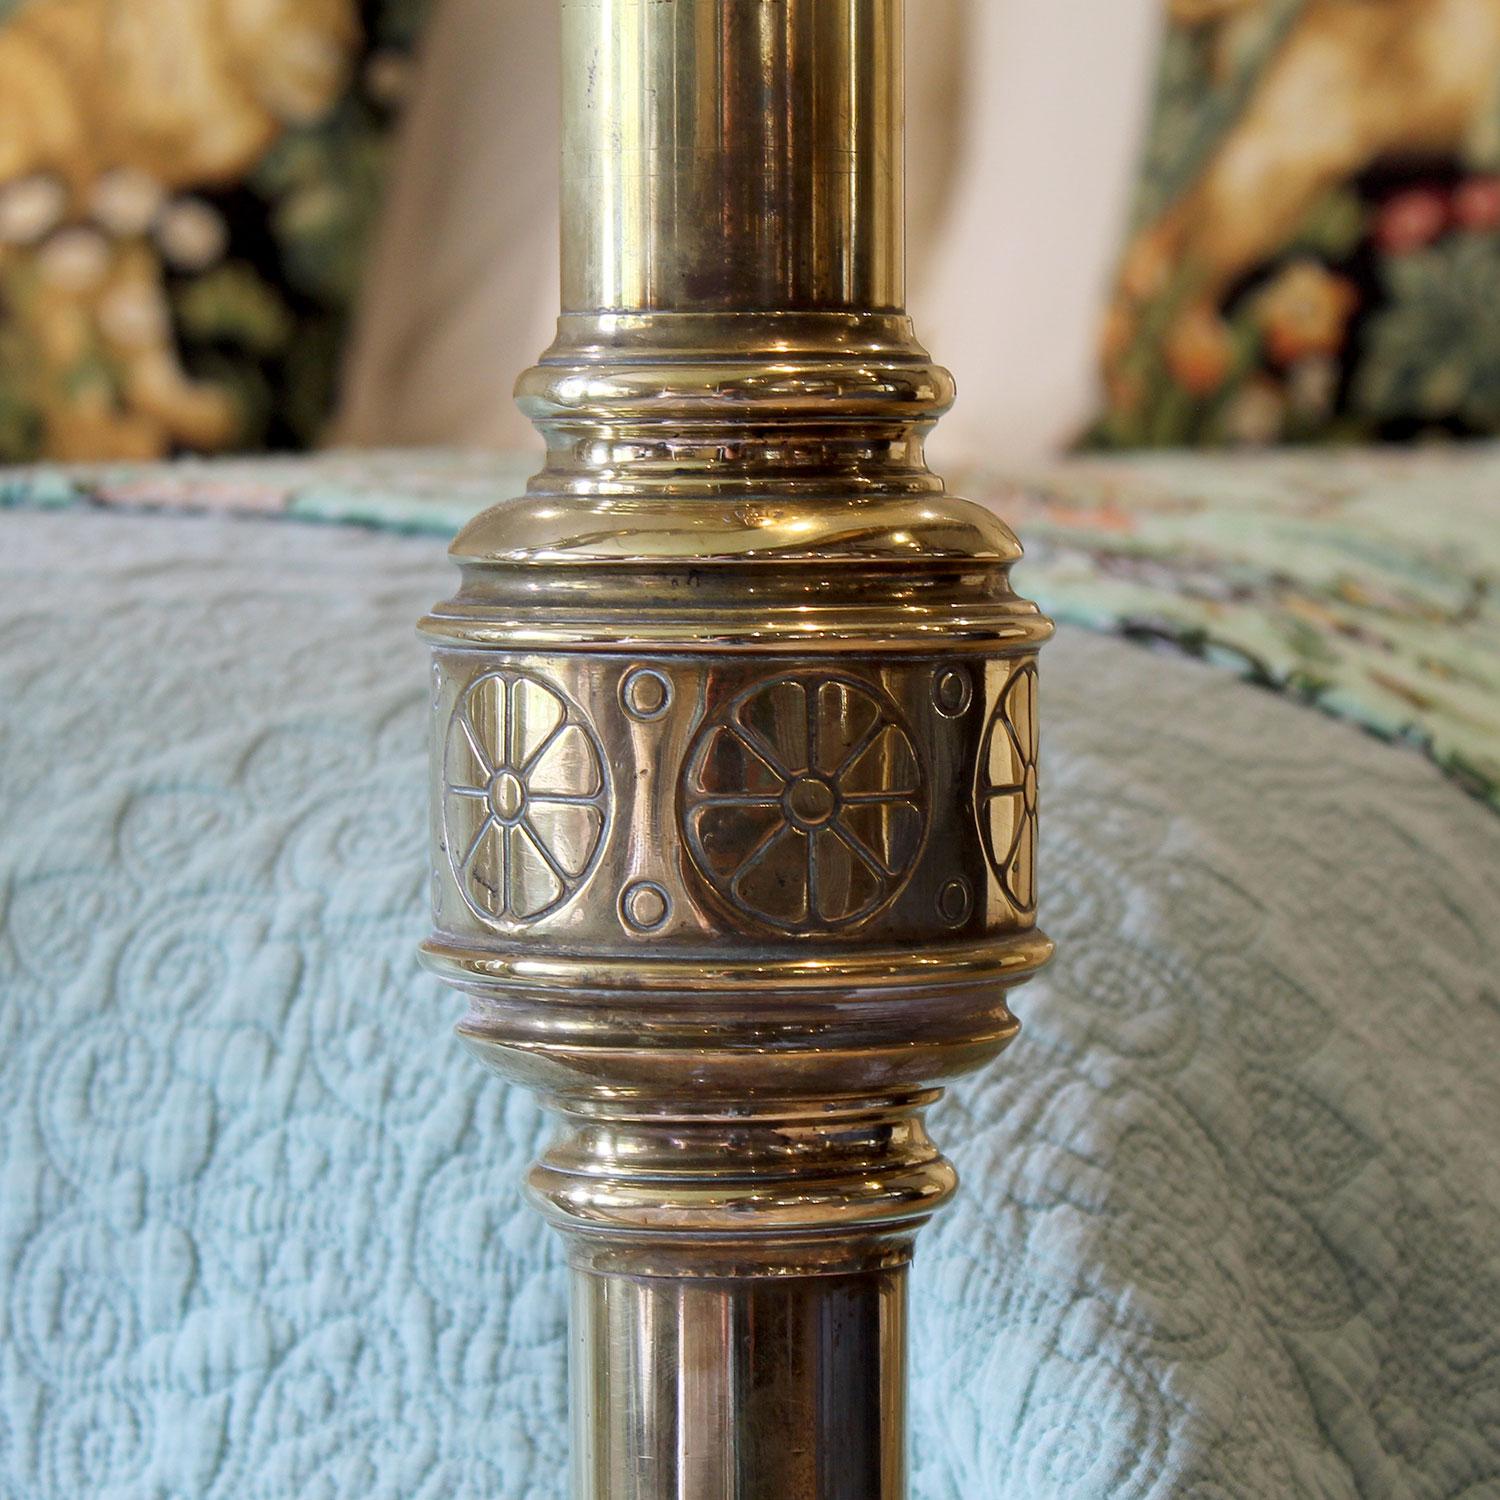 Decorative Victorian All Brass Antique Bed MK306 For Sale 2